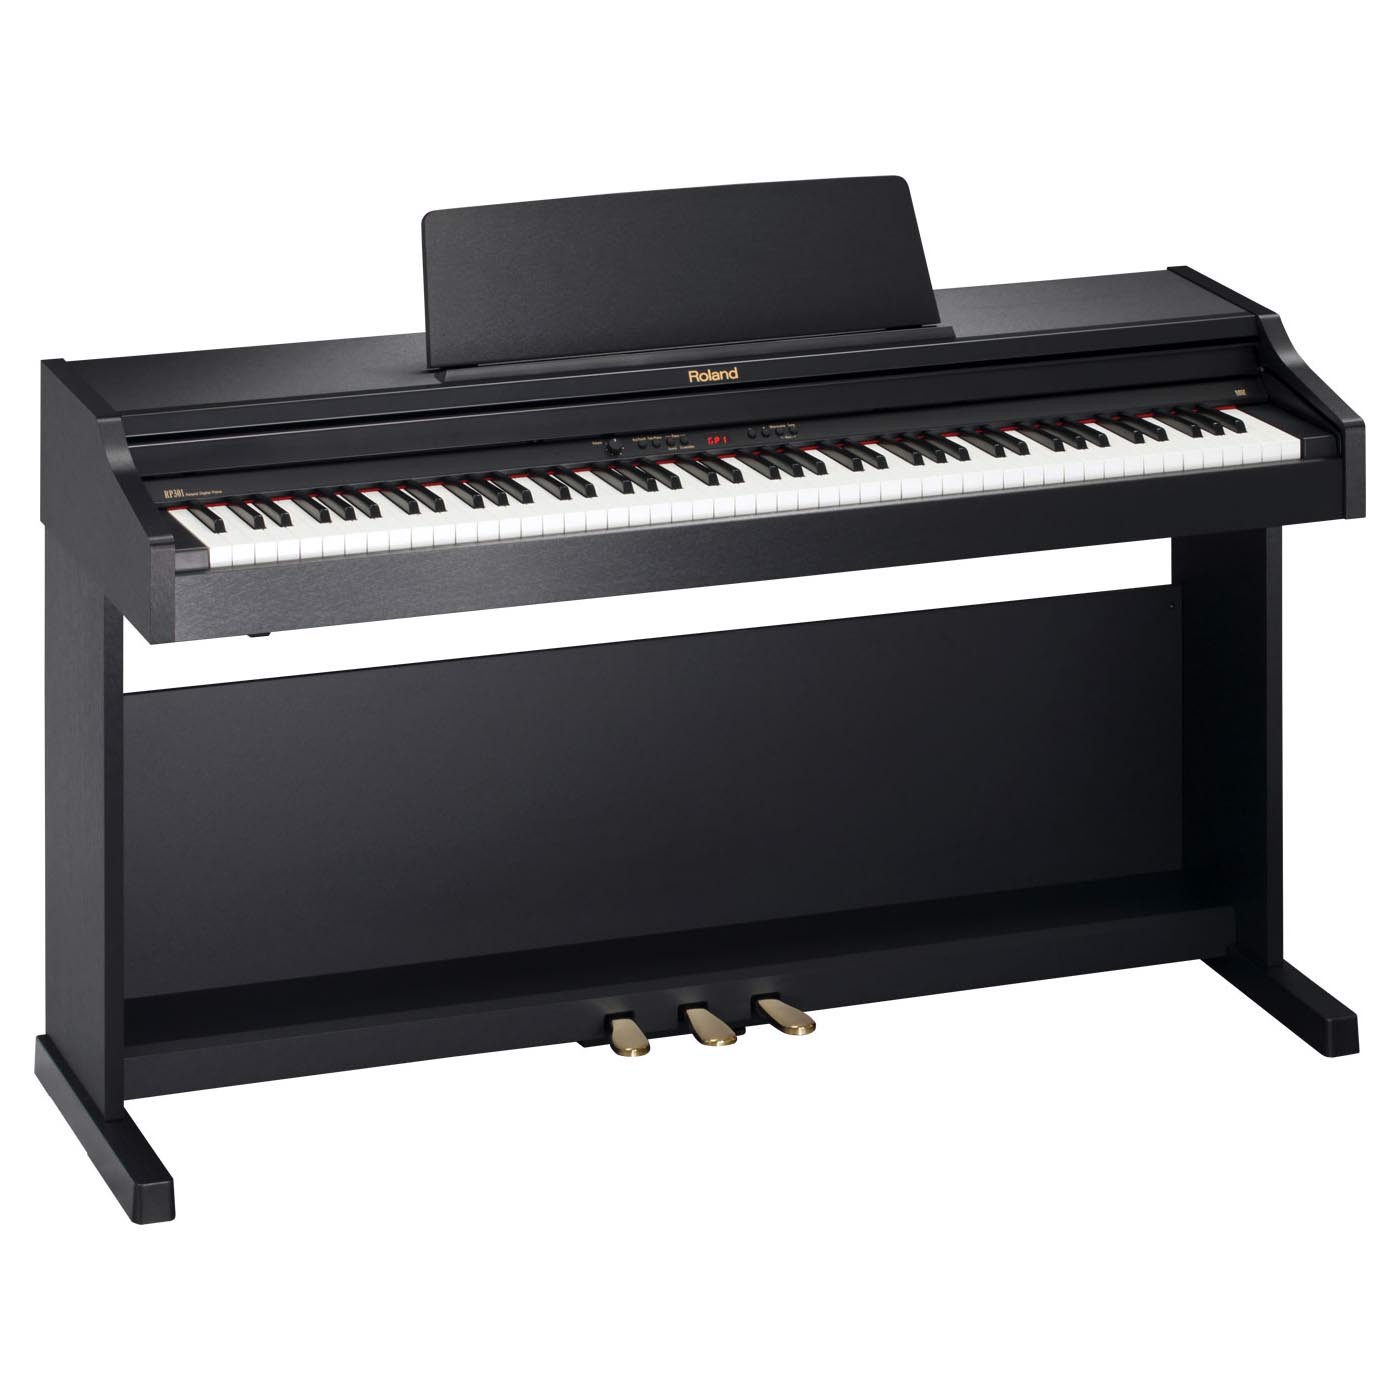 piano roland rp301 - st music